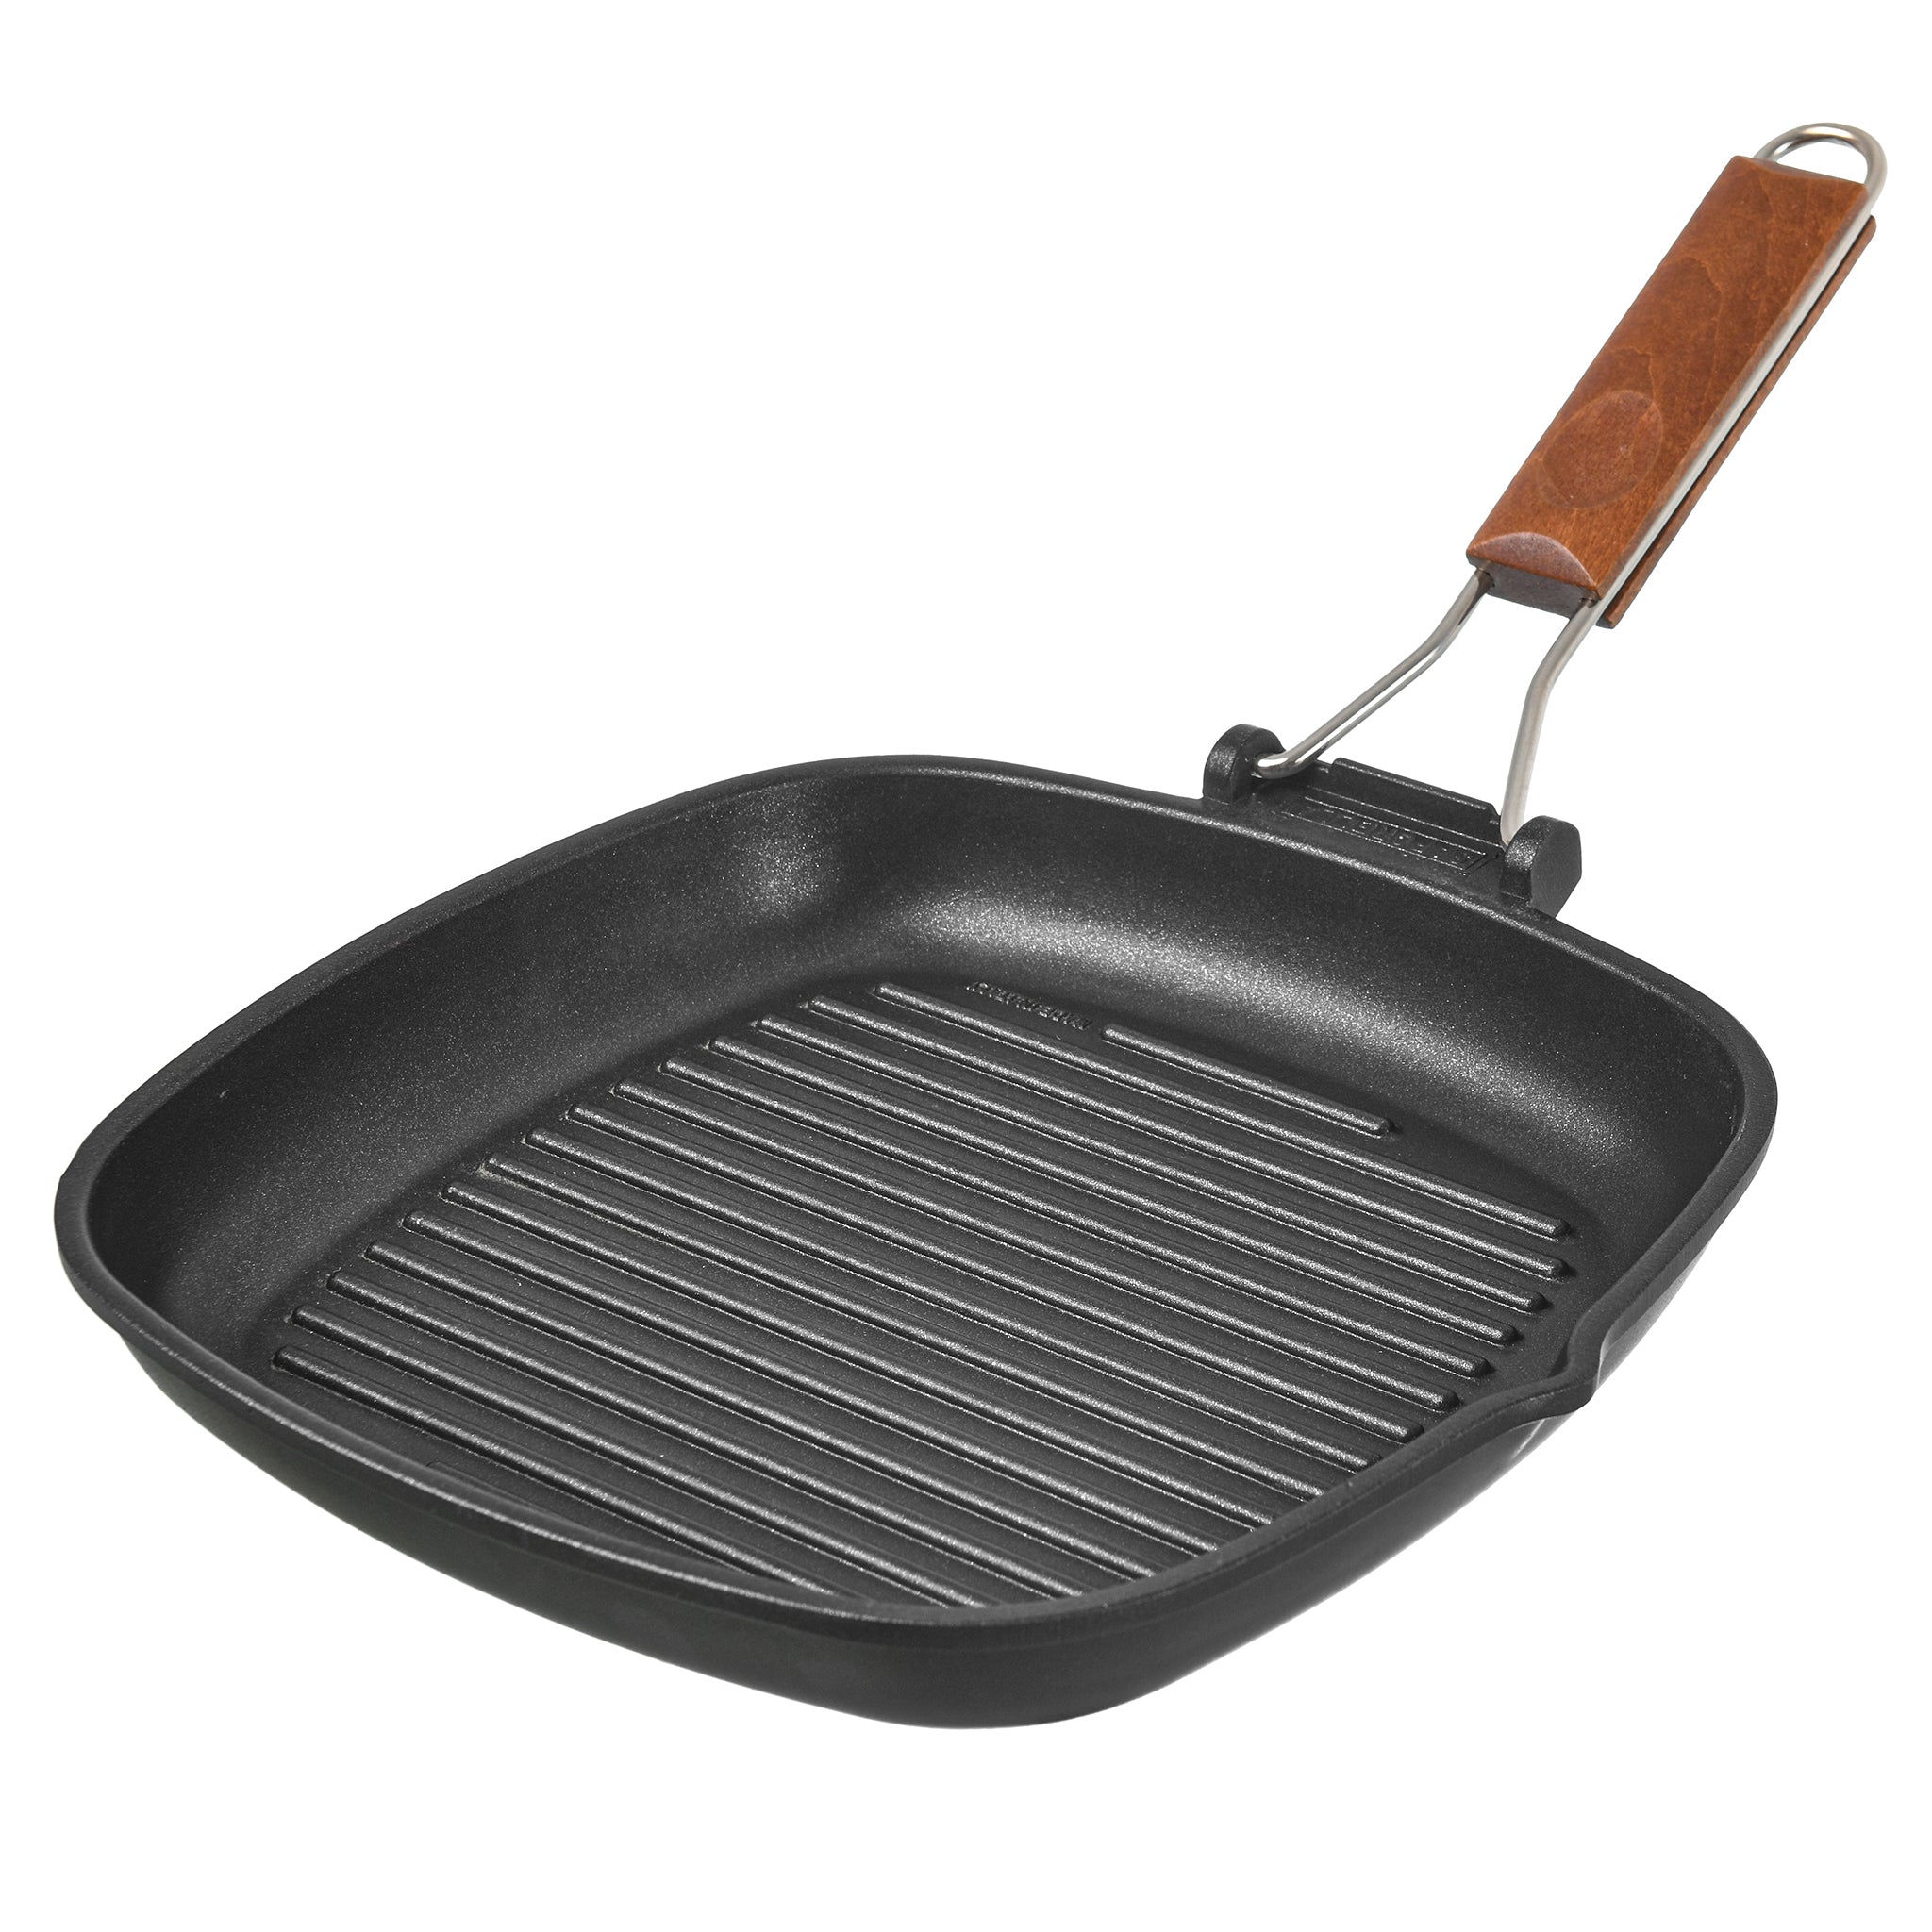 Risoli - Grill With Wood Folding Handle - 28cm - 44000414